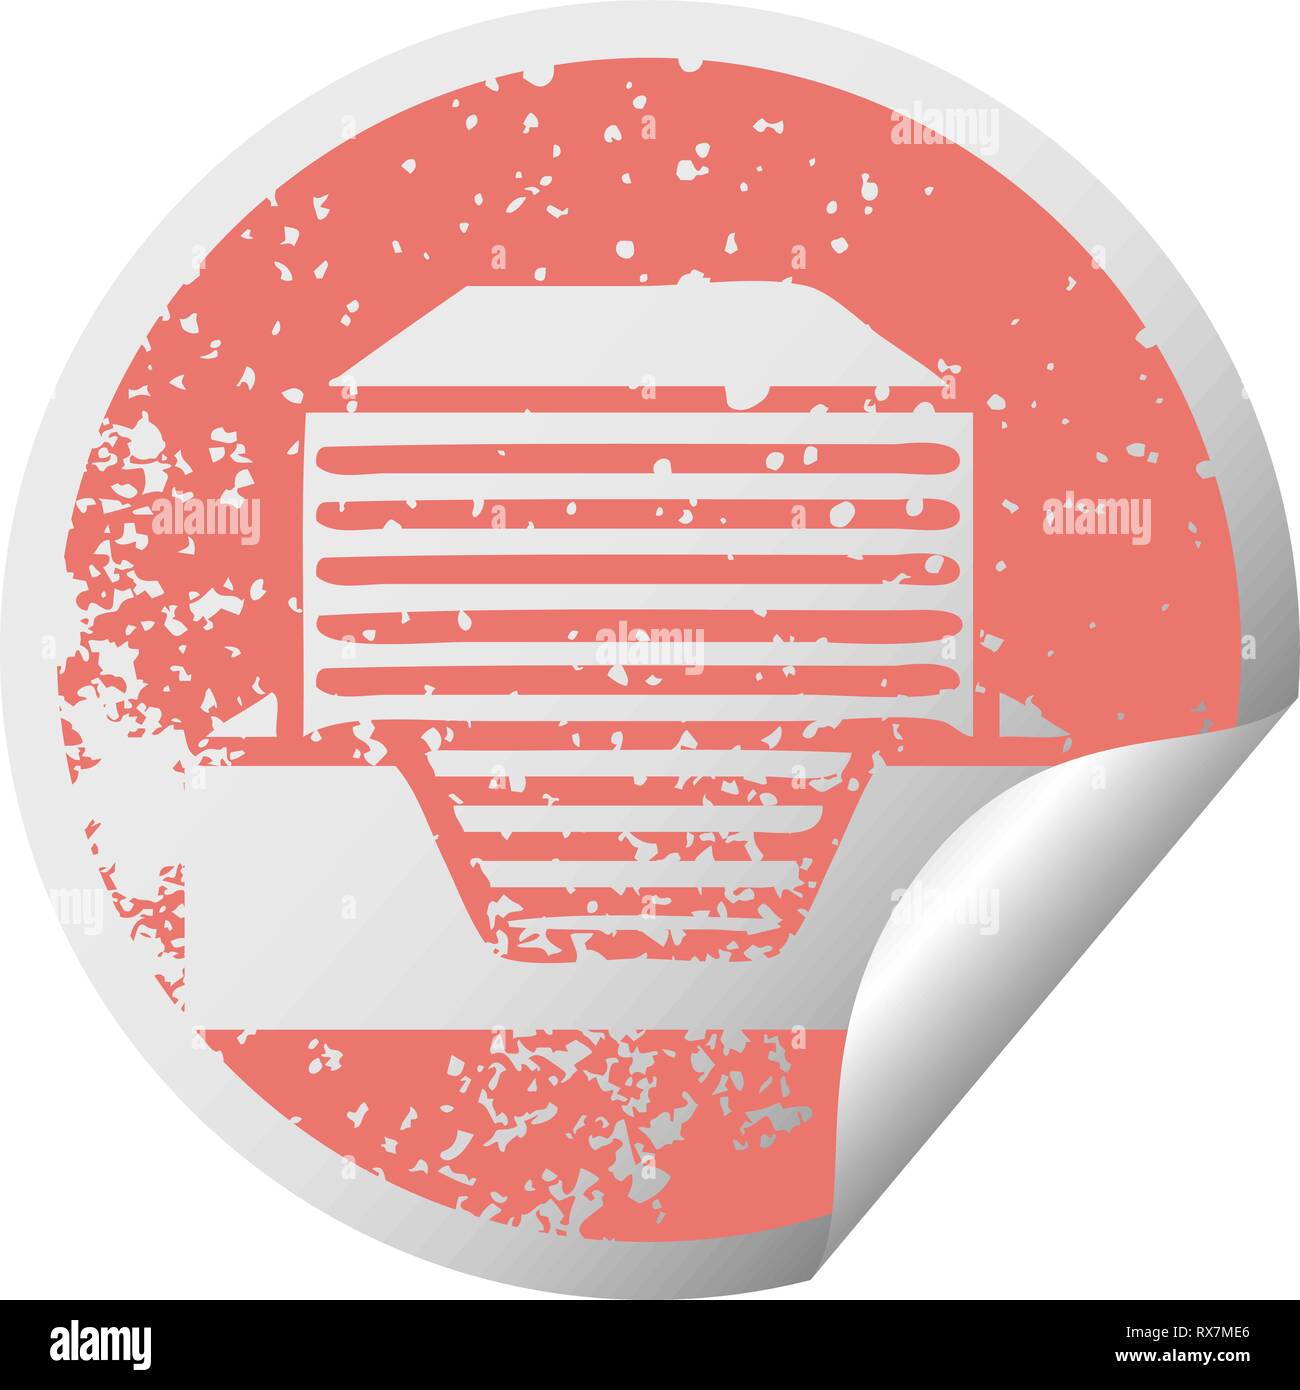 distressed circular peeling sticker symbol of a stack of office papers Stock Vector